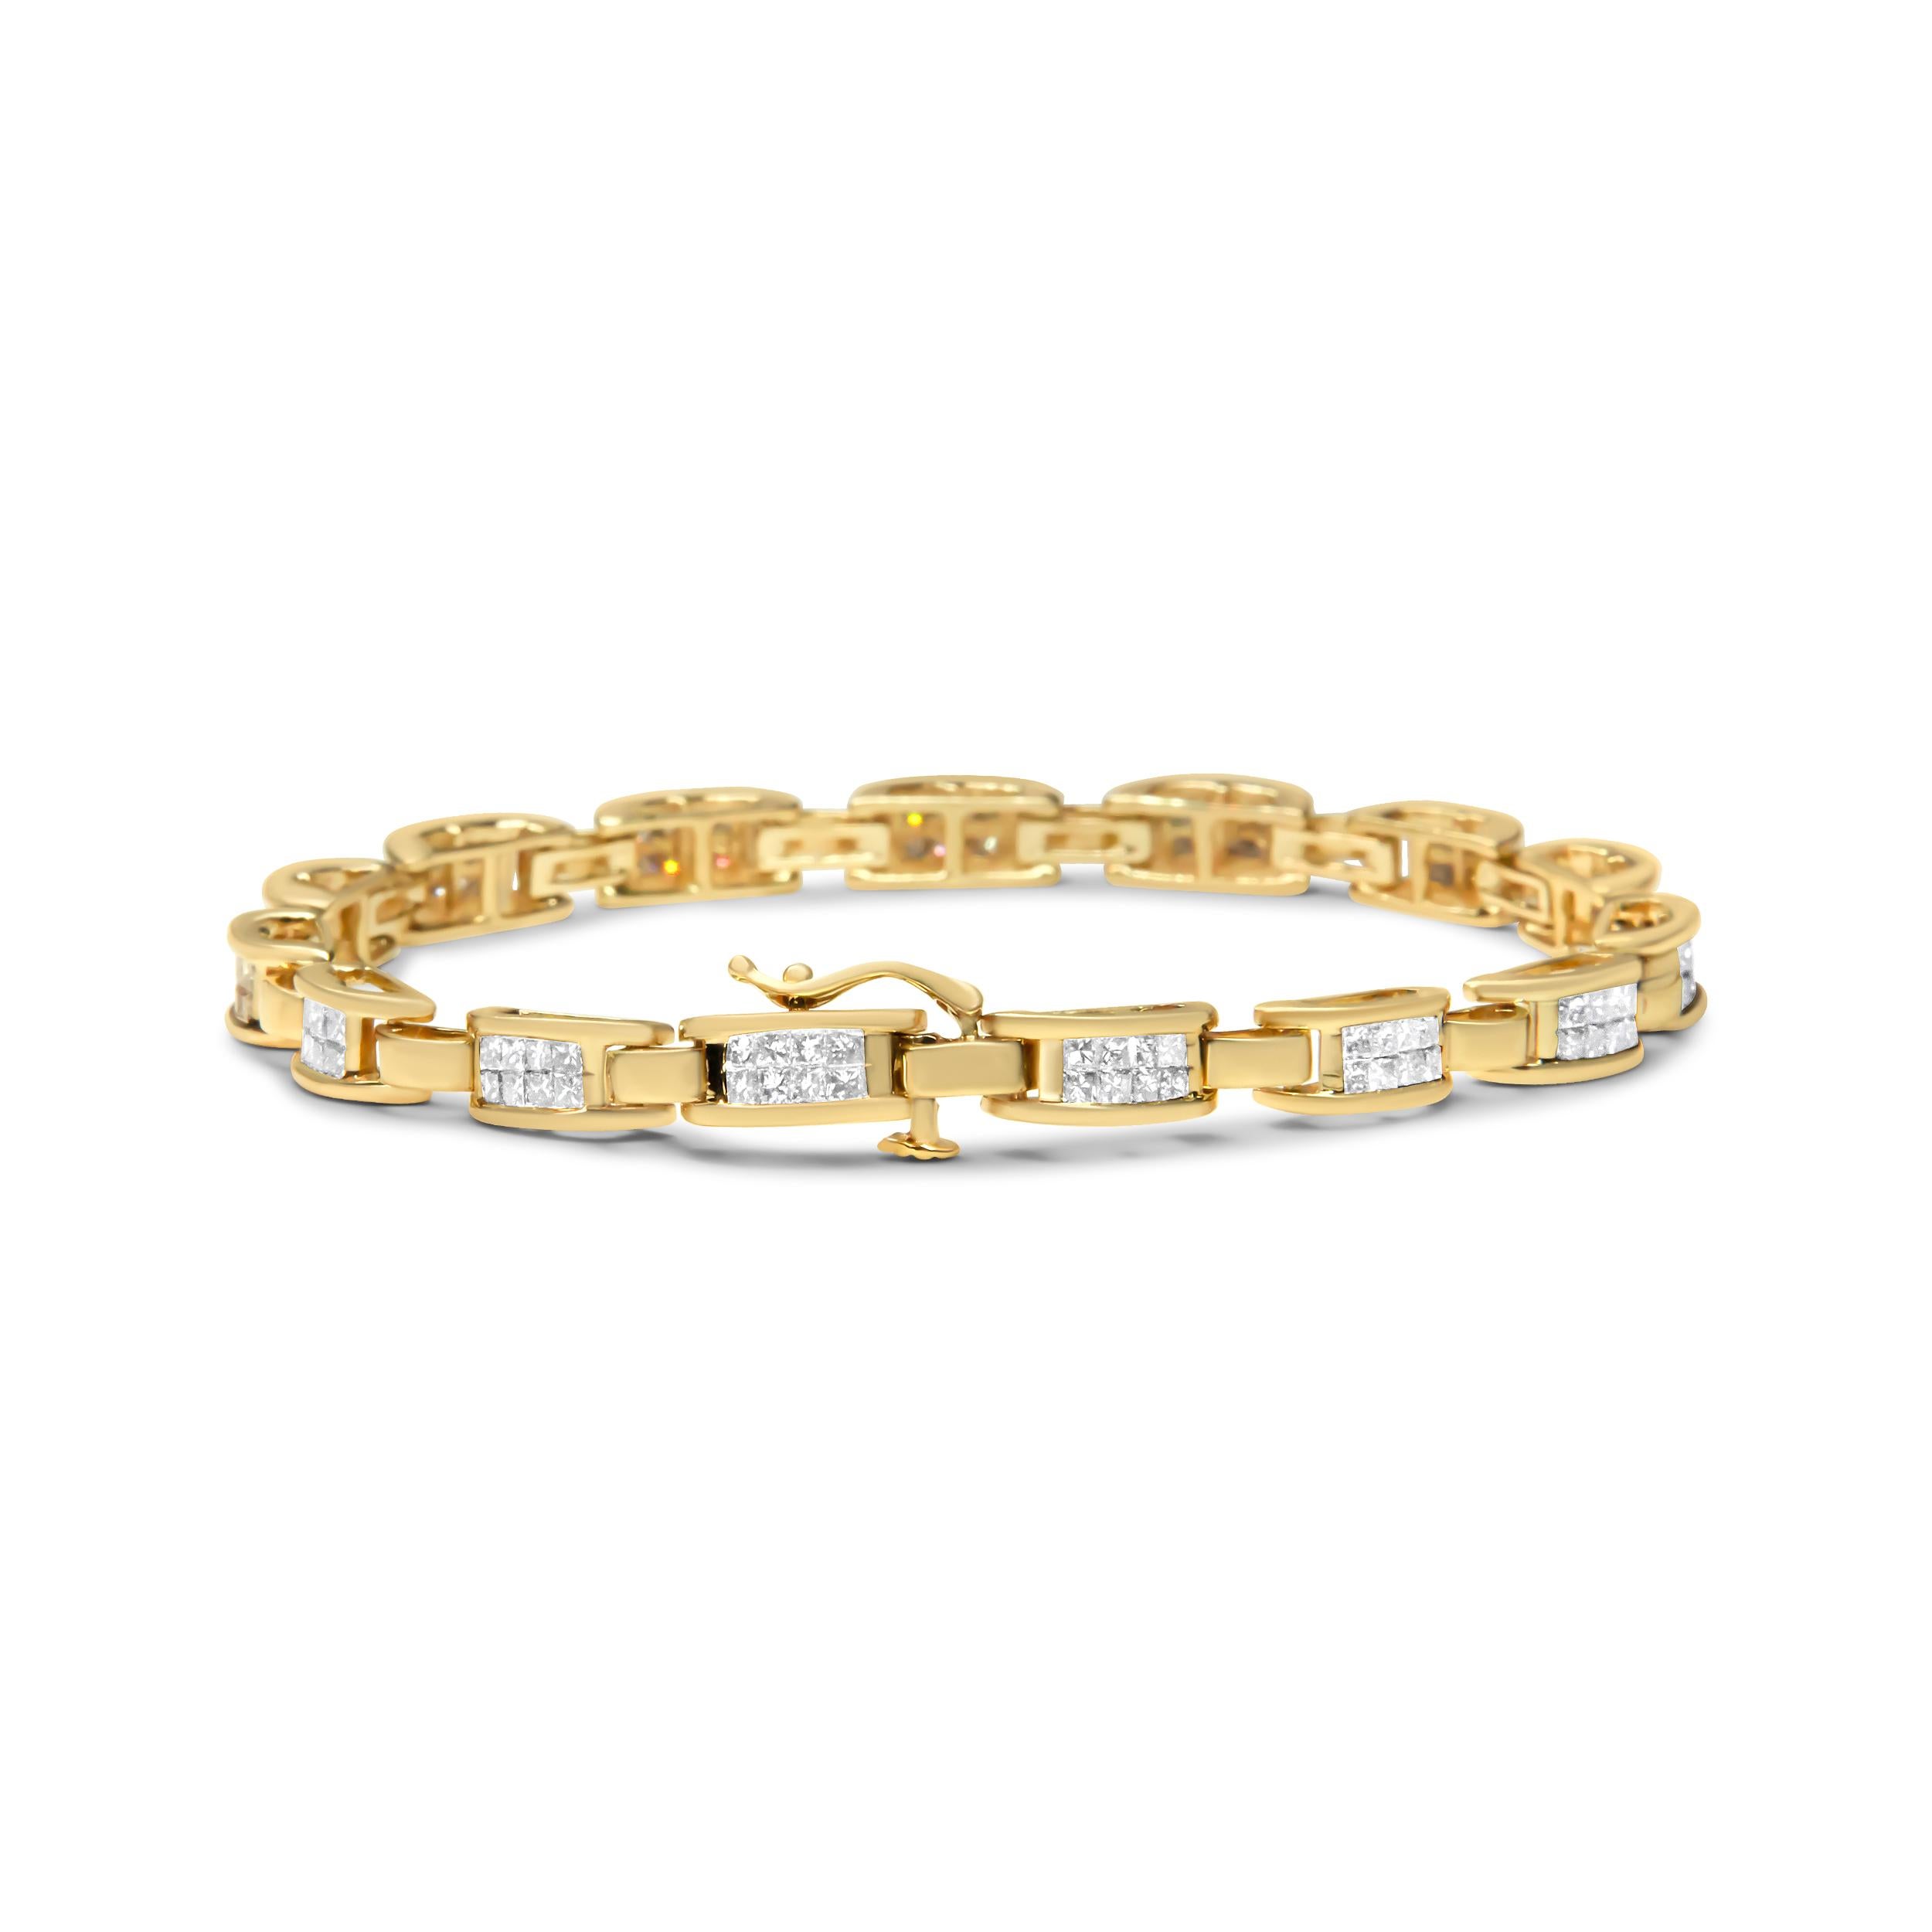 Slip into timeless luxury when you don this glamorously stunning diamond link bracelet. This classic bracelet takes on an enduring design that sparkles with a total 2 cttw princess-cut diamonds of an approximate I-J color and SI2-I1 clarity. The